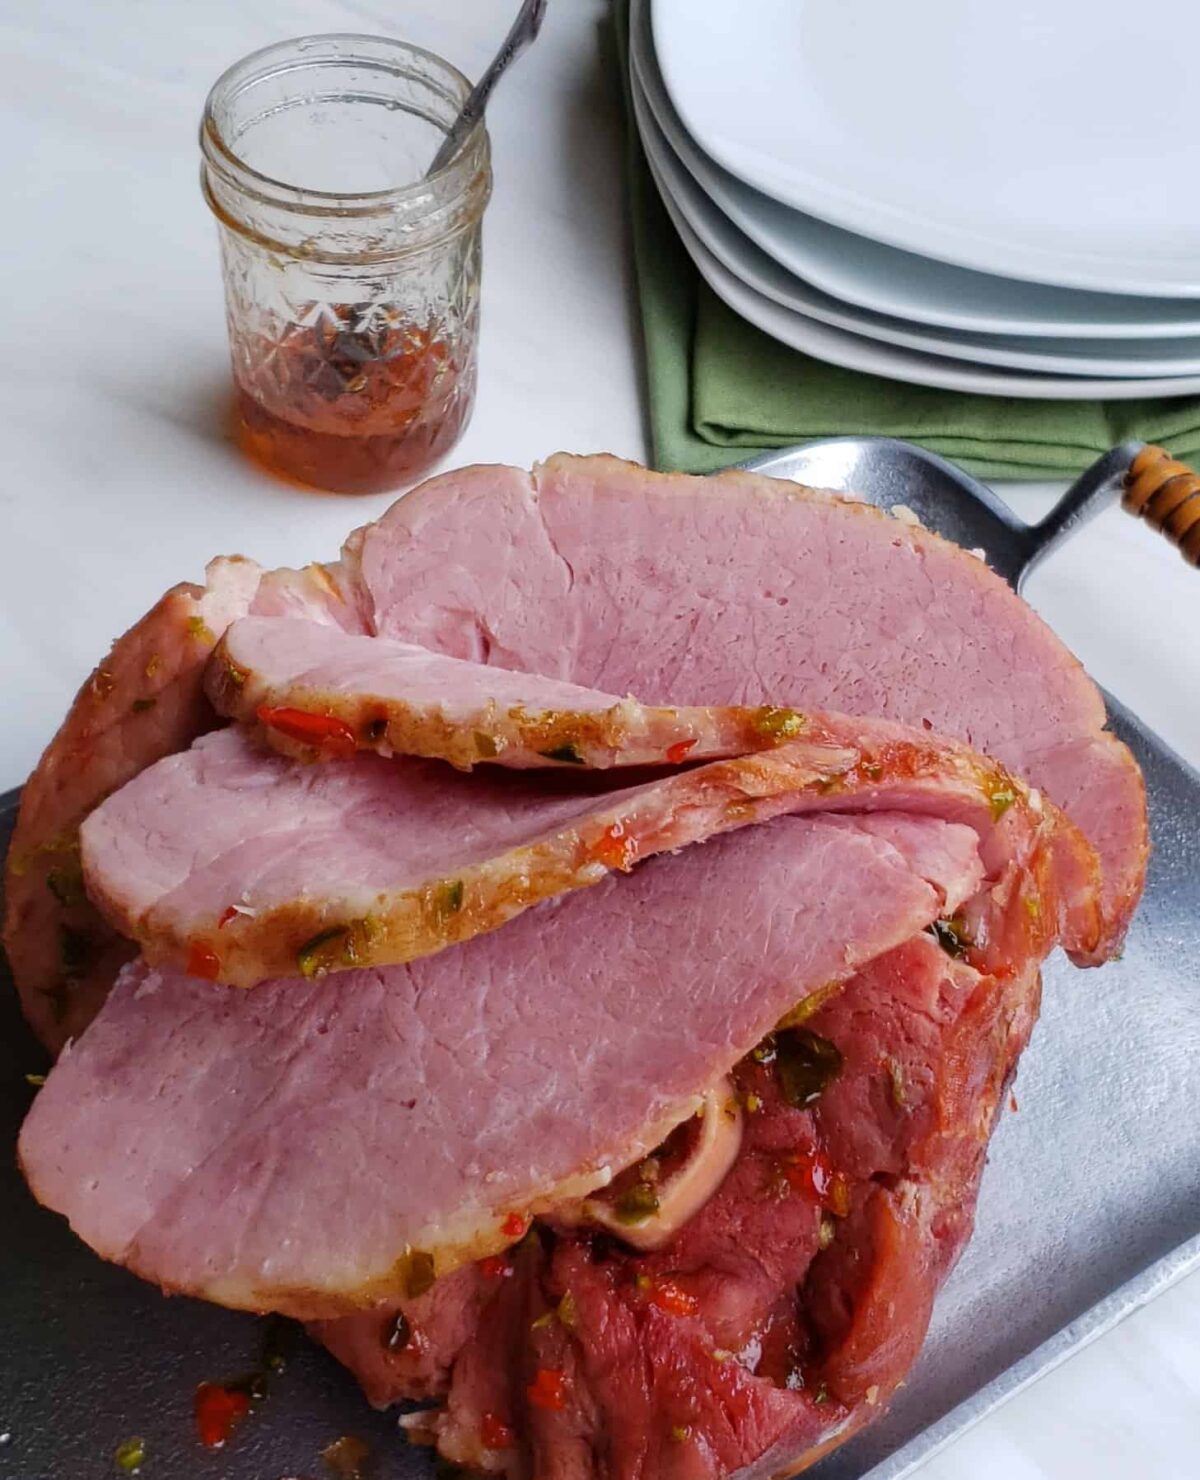 bone in ham with slices cut on the ham. jar of jelly